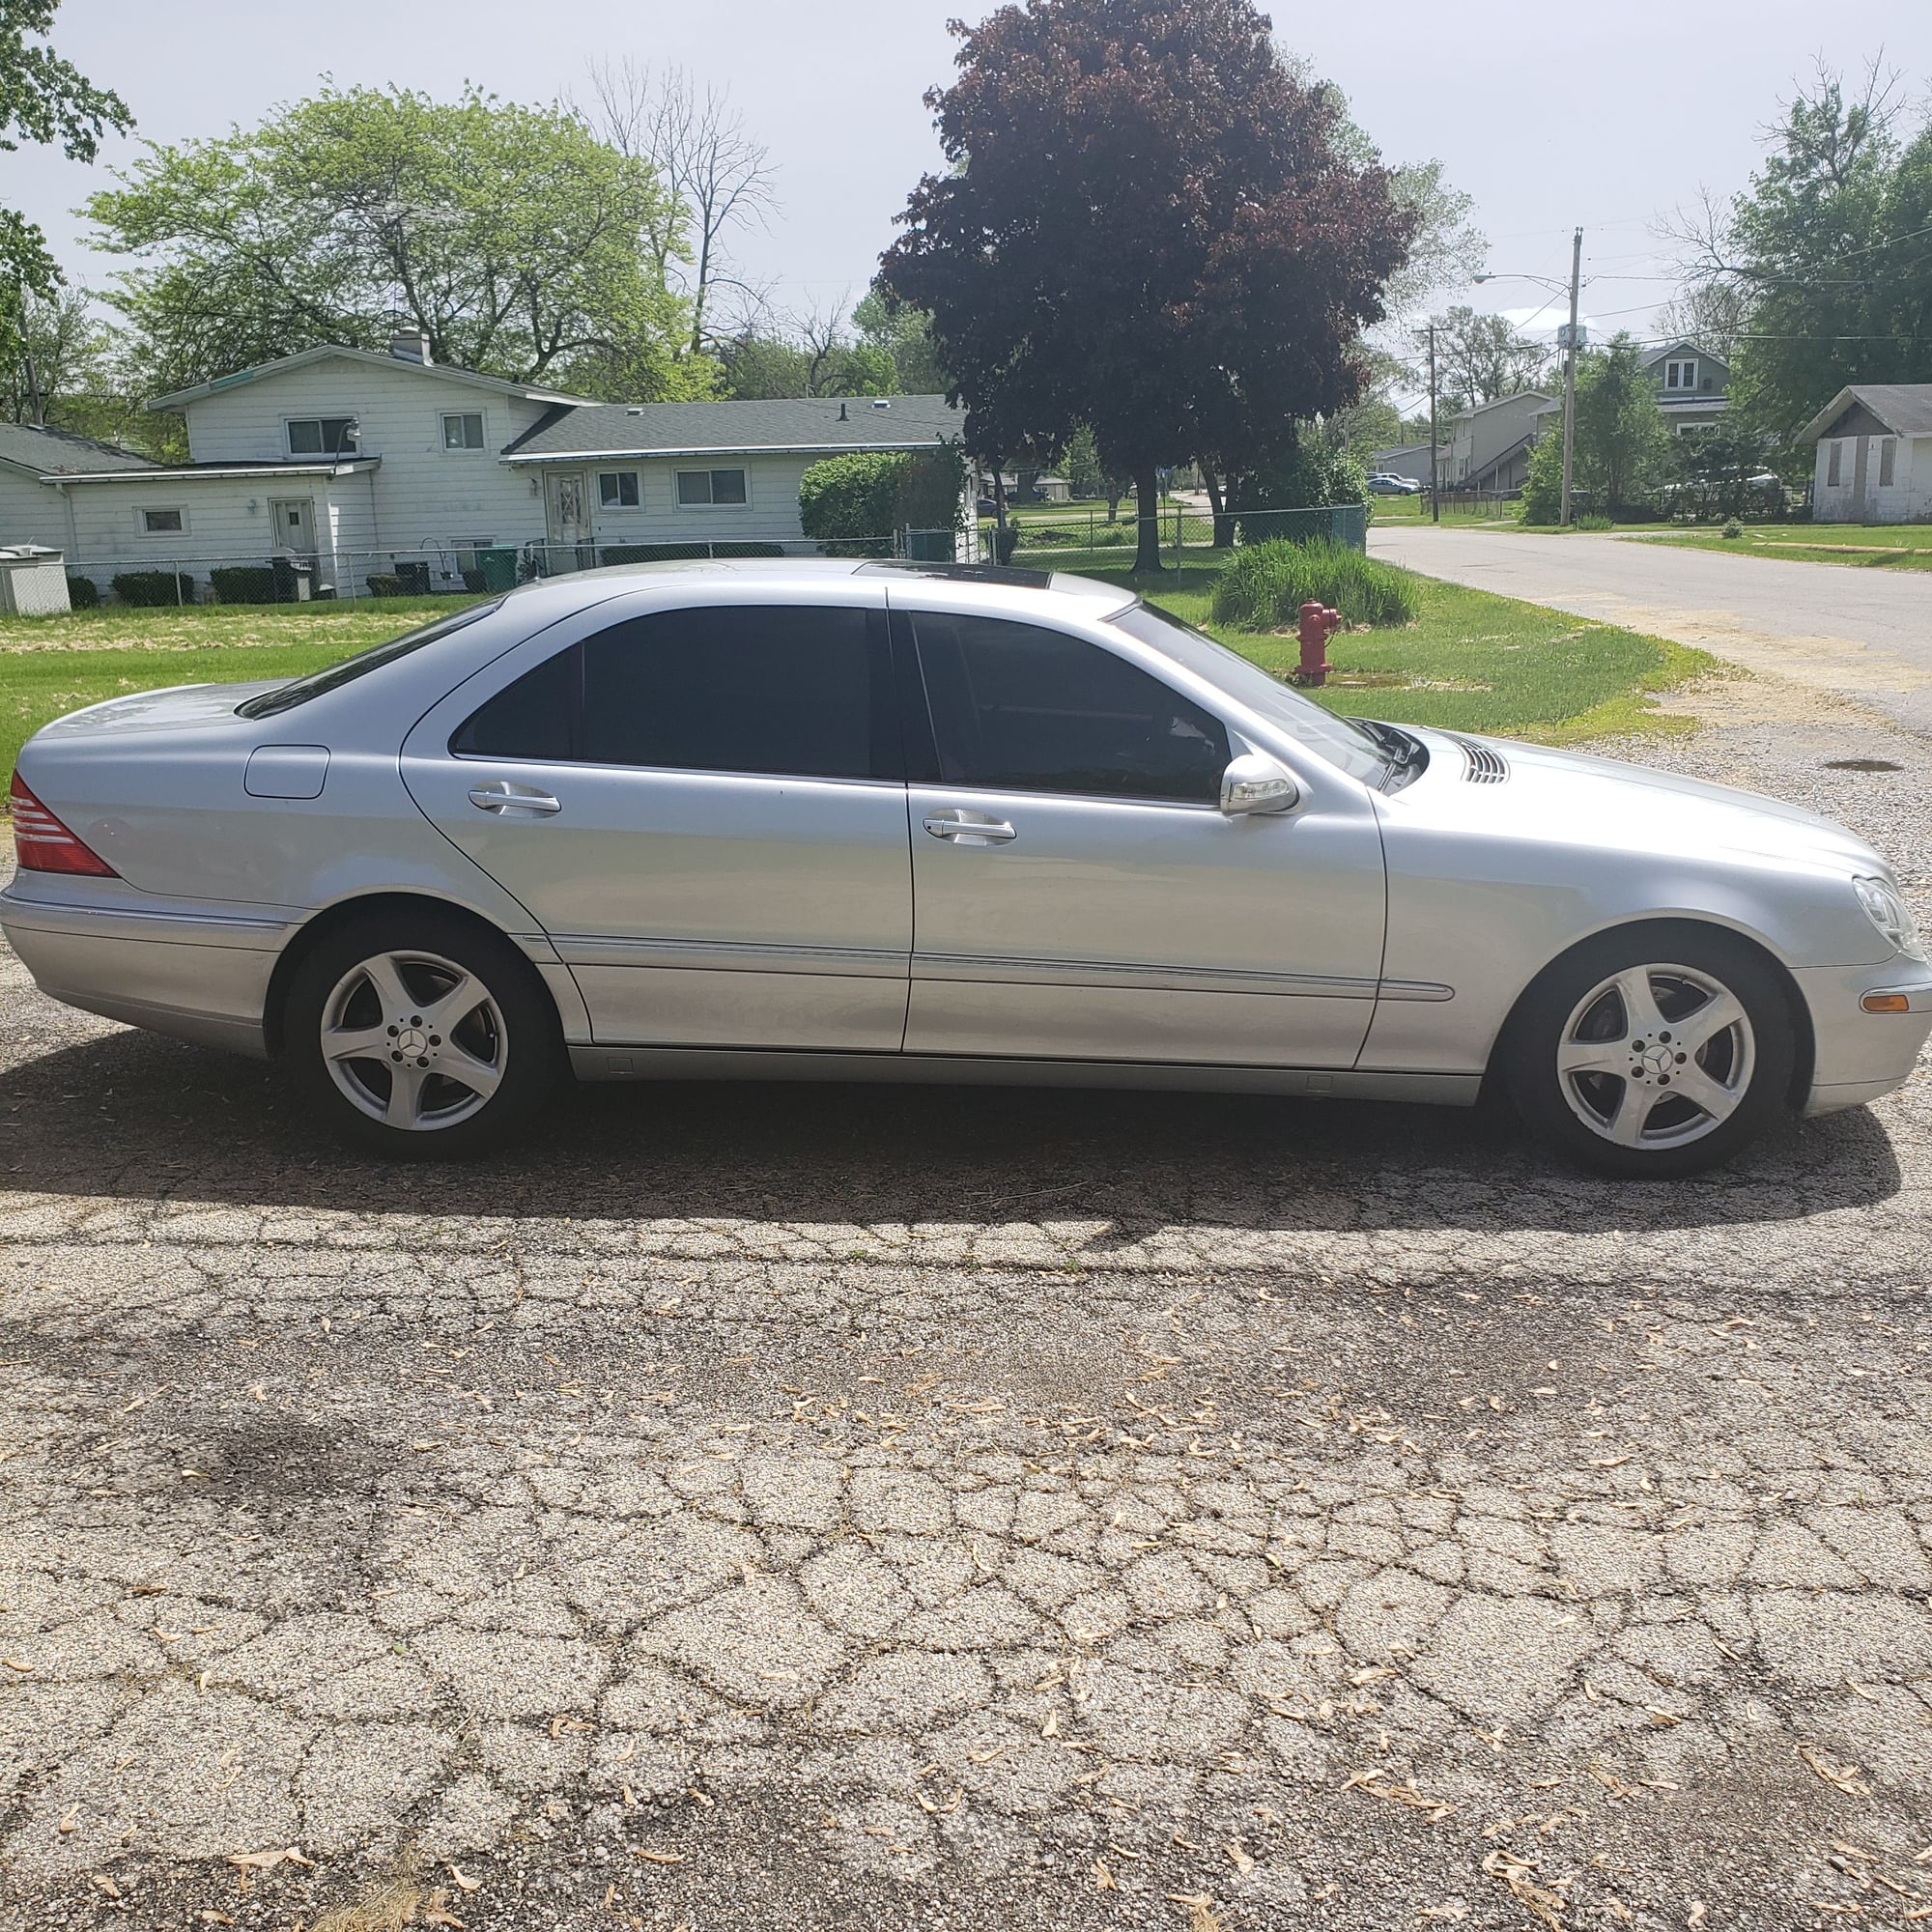 2004 Mercedes-Benz S430 - EXCEPTIONAL LOW MILEAGE 2004 S430 MANY UPGRADES $8,900 ($9,400 w/extras listed below) - Used - VIN WDBNG70JX4A392857 - 72,289 Miles - 8 cyl - 2WD - Automatic - Sedan - Silver - Joliet, IL 60436, United States